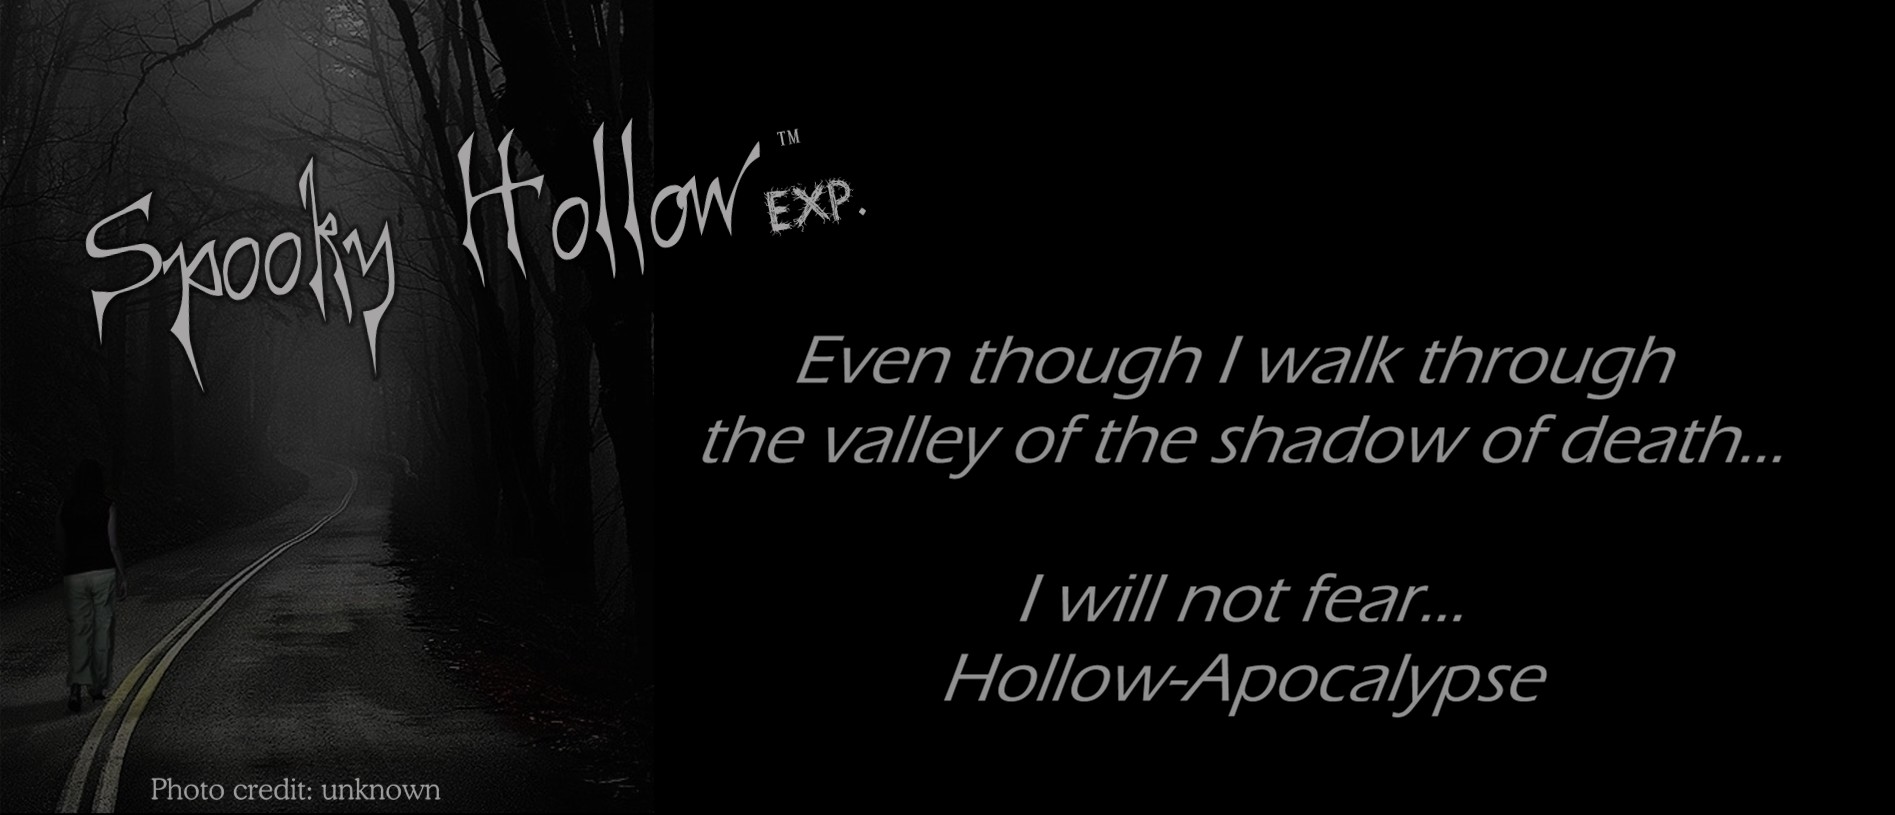 Spooky Hollow Experience 2012 title